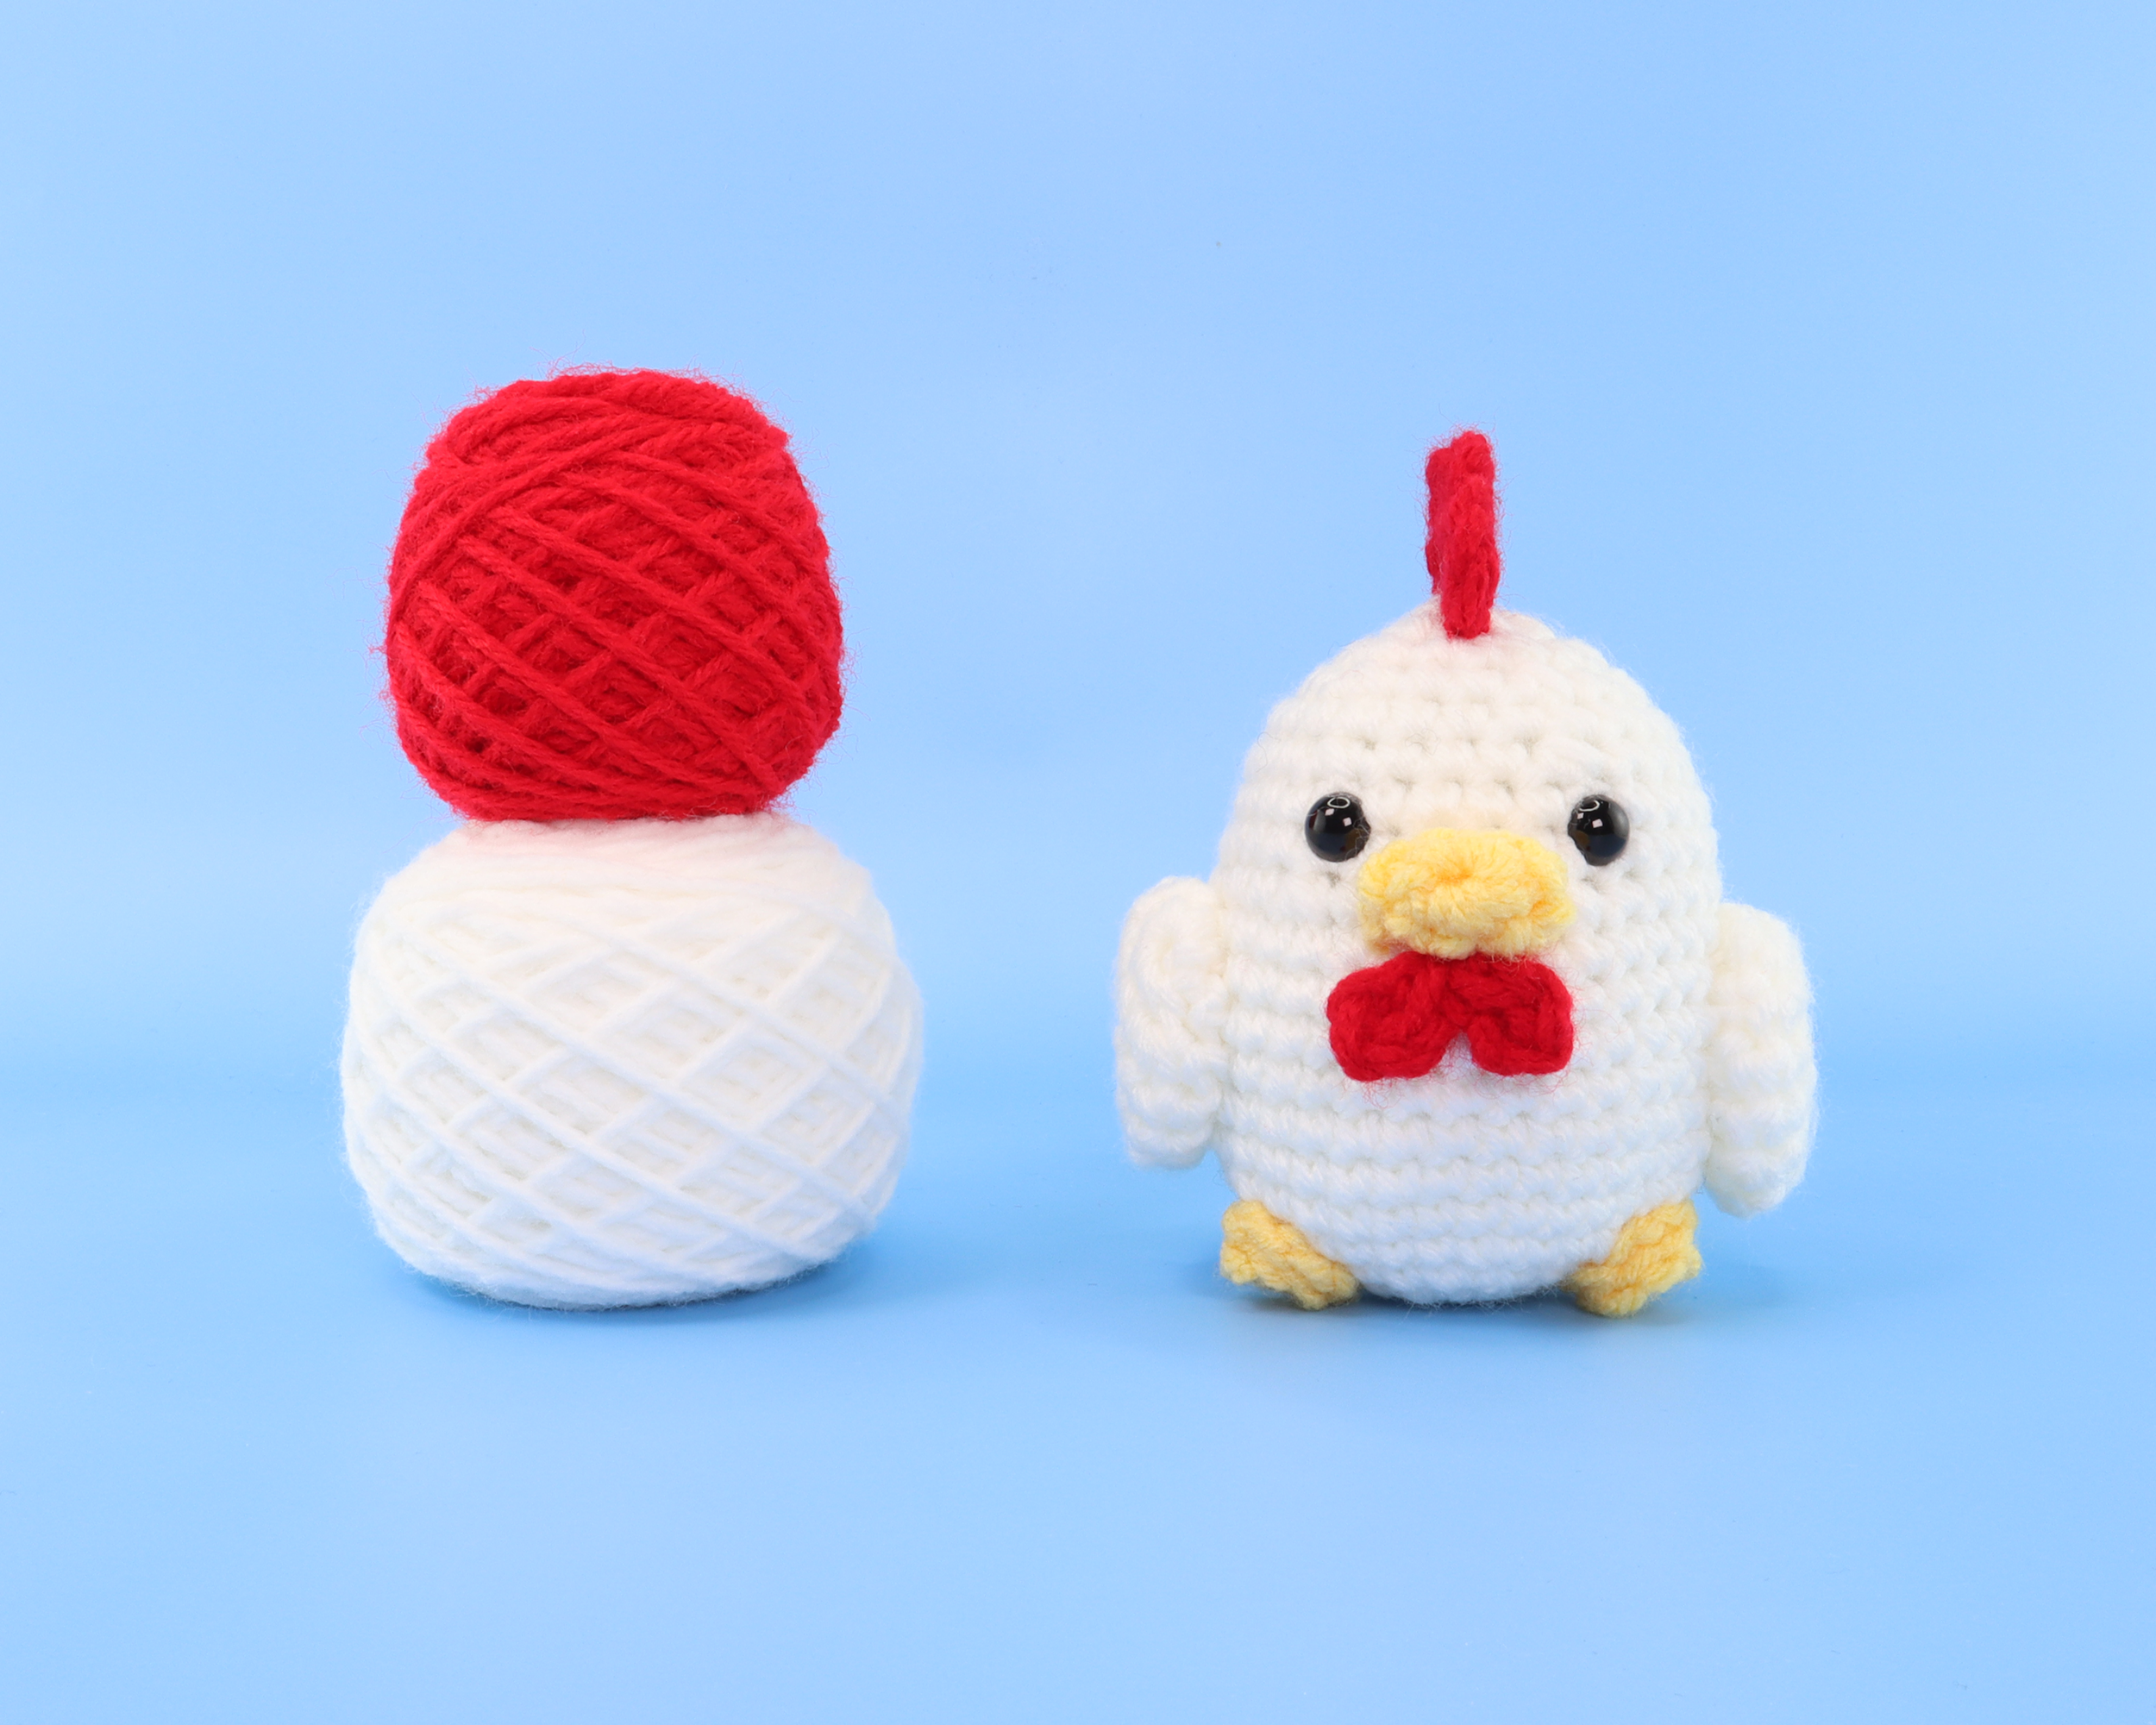 Kenny The Rooster Crochet Kit